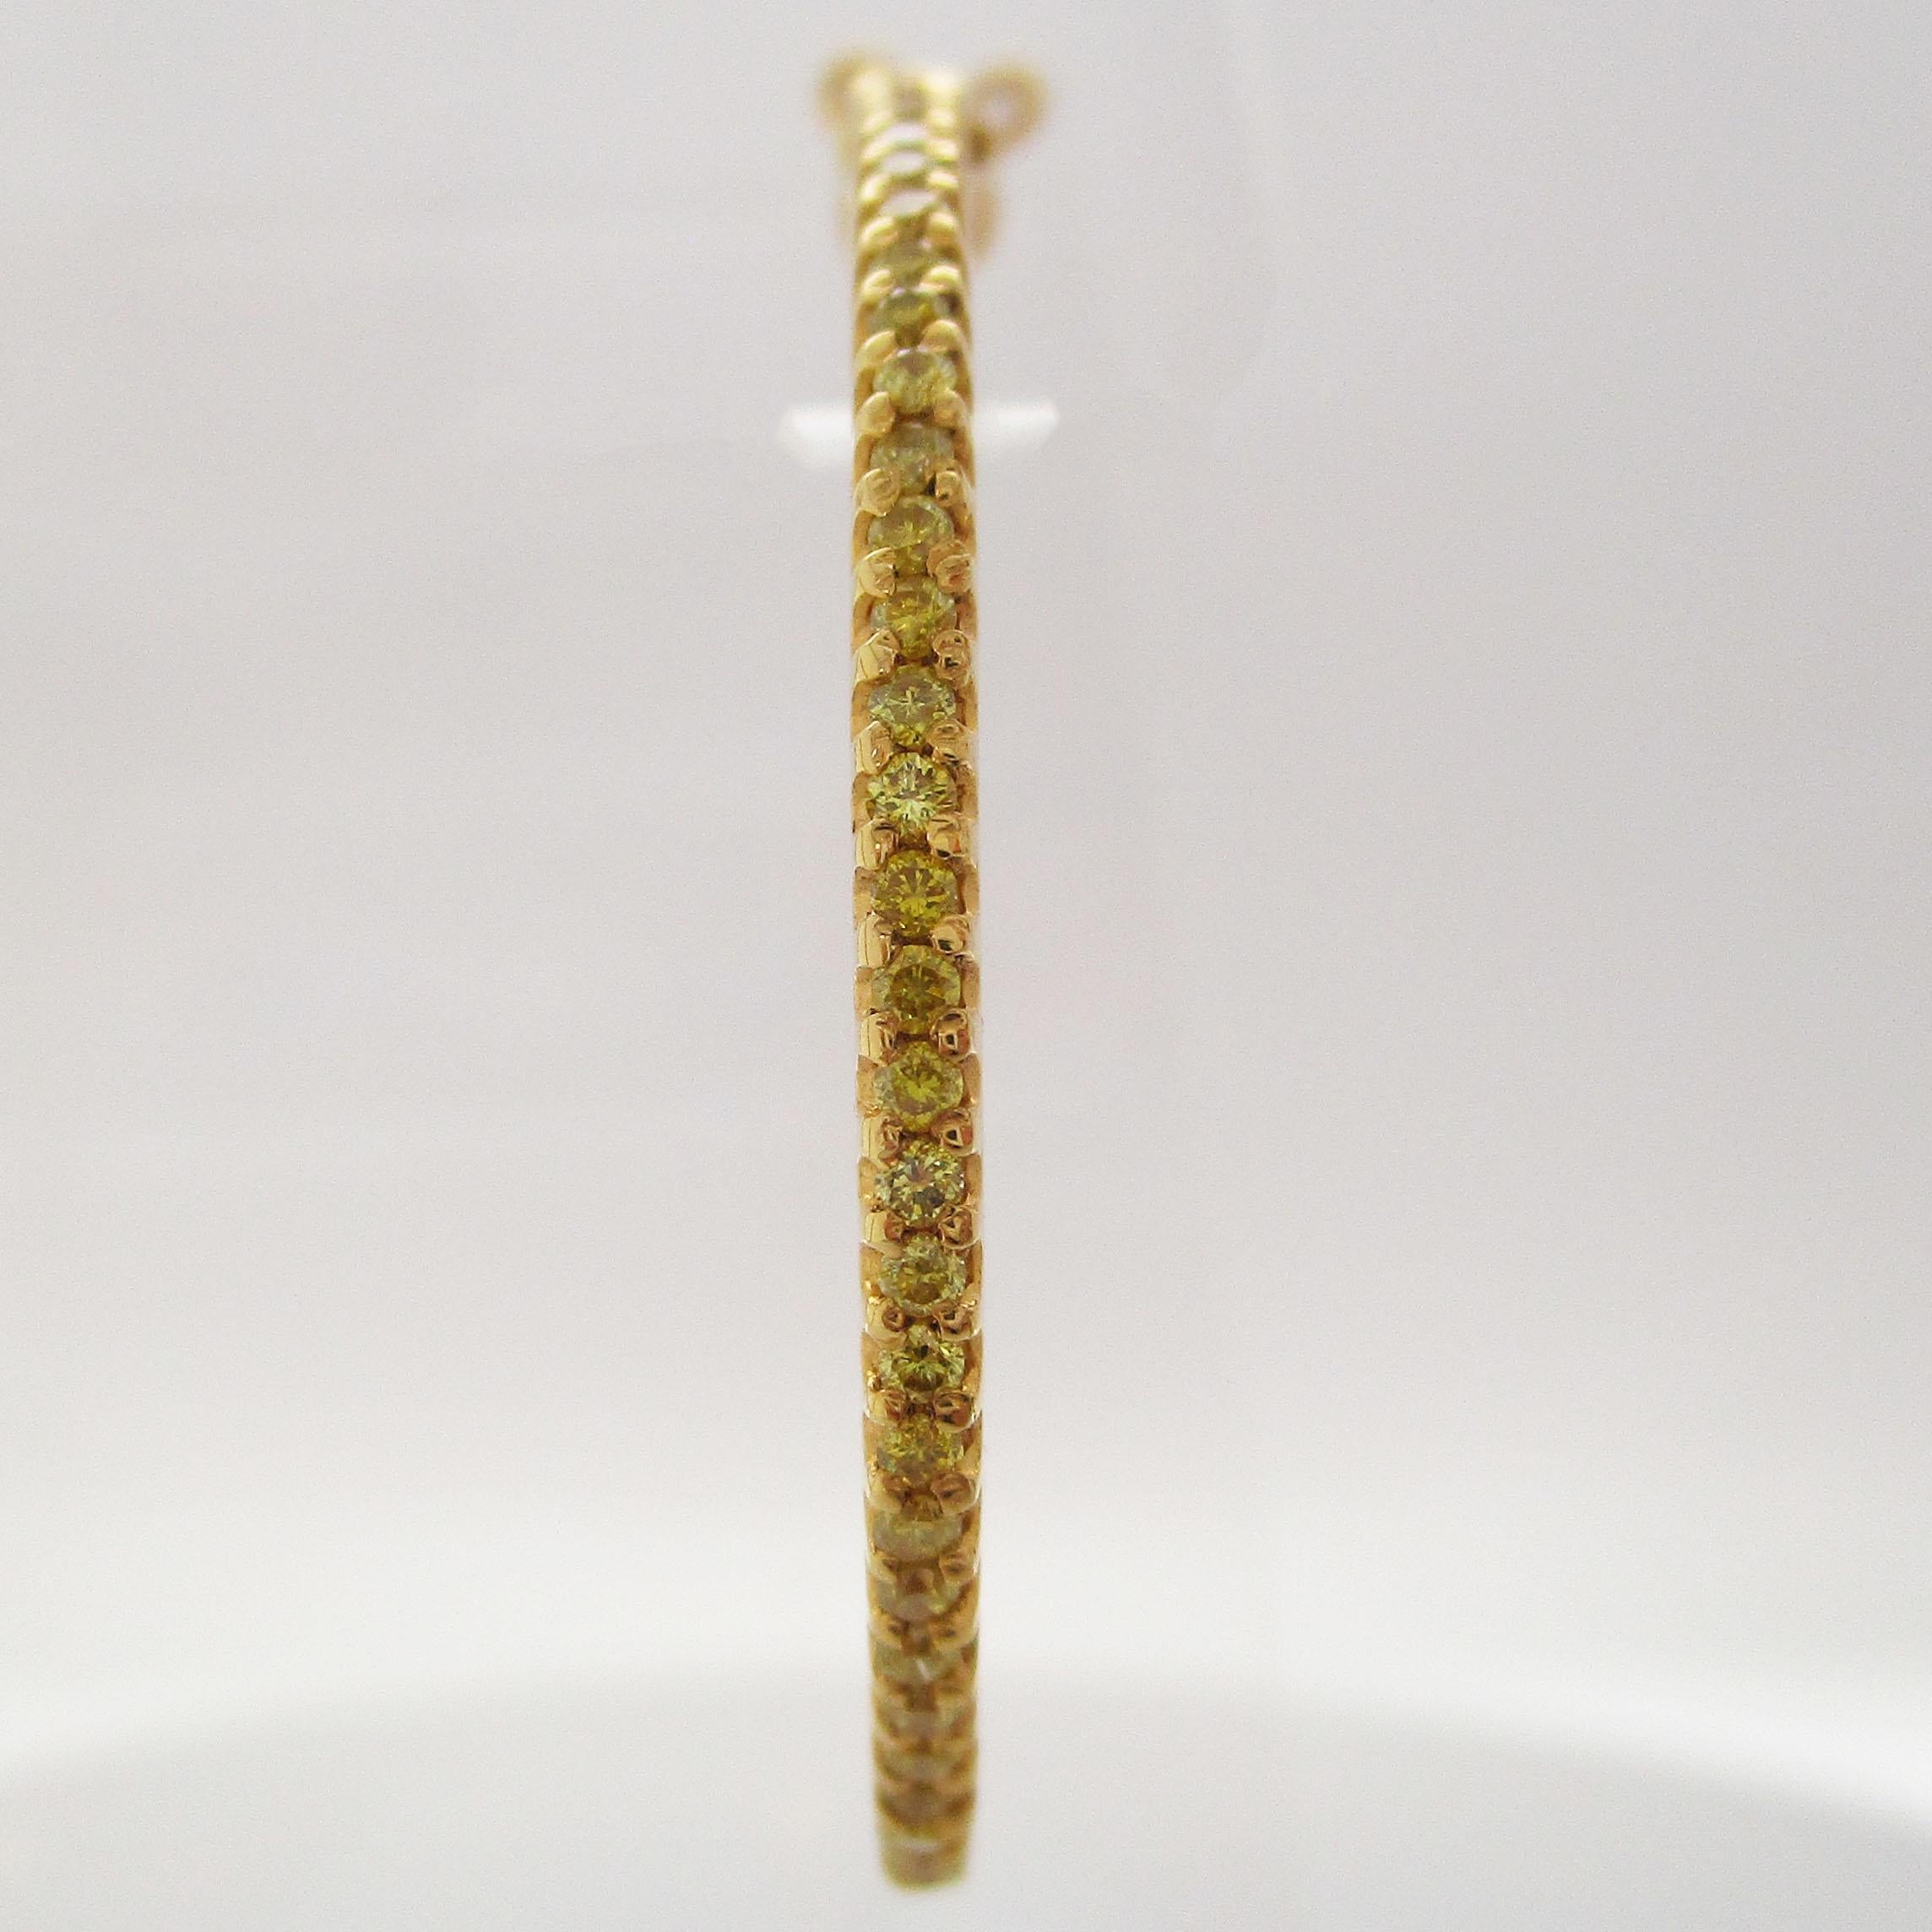 This is a gorgeous pair of hoop earrings in 14k yellow gold studded with beautiful natural fancy yellow diamonds! These earrings take the classic, go-with-everything look of hoop earrings and throw in the enchanting beauty of fancy yellow diamonds